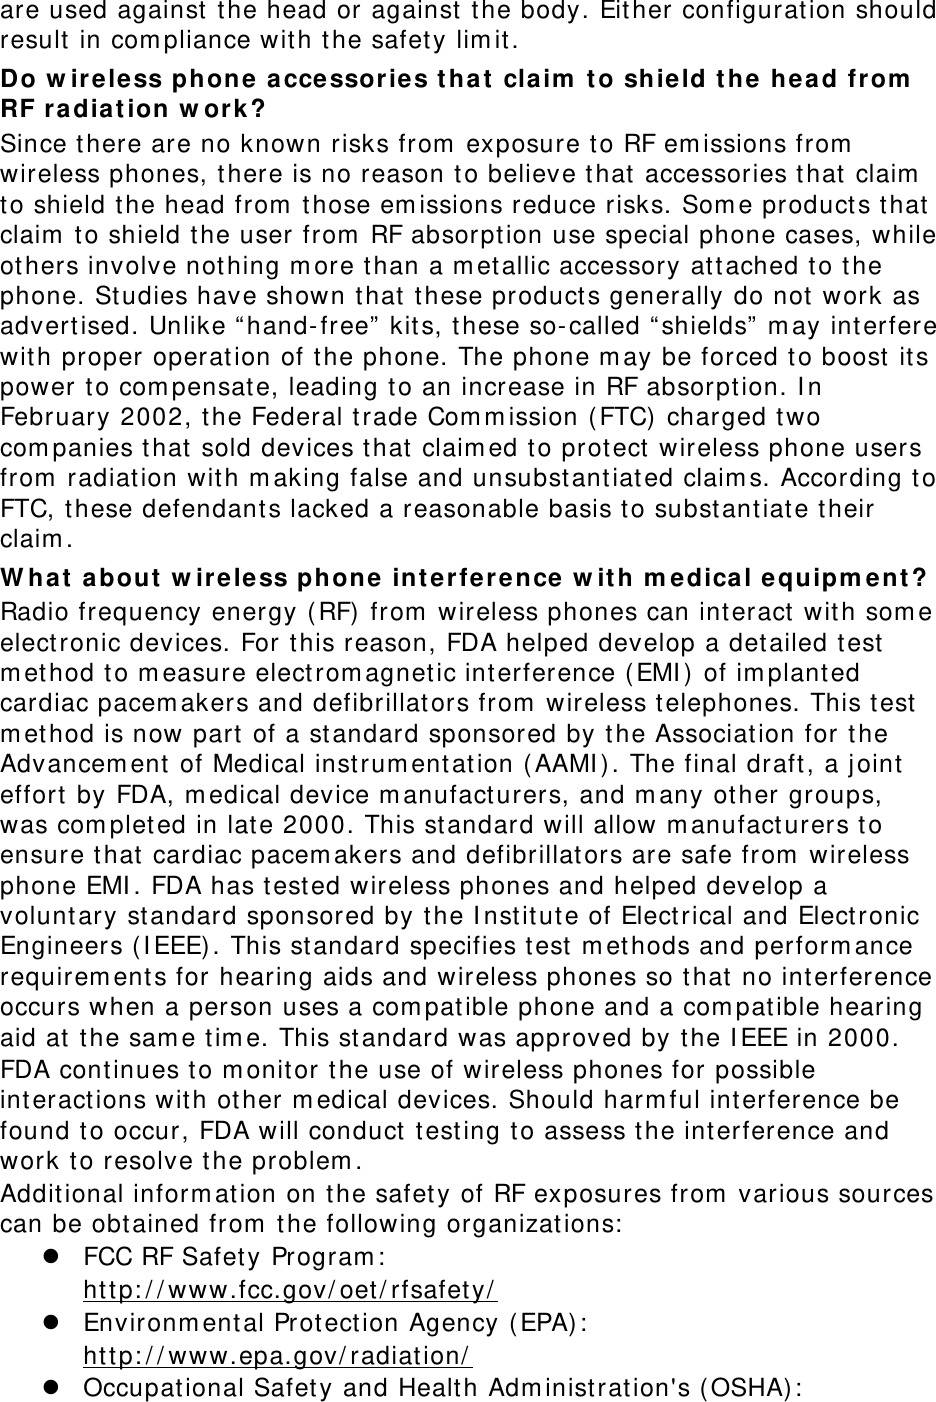 are used against the head or against the body. Either configuration should result in compliance with the safety limit. Do wireless phone accessories that claim to shield the head from RF radiation work? Since there are no known risks from exposure to RF emissions from wireless phones, there is no reason to believe that accessories that claim to shield the head from those emissions reduce risks. Some products that claim to shield the user from RF absorption use special phone cases, while others involve nothing more than a metallic accessory attached to the phone. Studies have shown that these products generally do not work as advertised. Unlike “hand-free” kits, these so-called “shields” may interfere with proper operation of the phone. The phone may be forced to boost its power to compensate, leading to an increase in RF absorption. In February 2002, the Federal trade Commission (FTC) charged two companies that sold devices that claimed to protect wireless phone users from radiation with making false and unsubstantiated claims. According to FTC, these defendants lacked a reasonable basis to substantiate their claim. What about wireless phone interference with medical equipment? Radio frequency energy (RF) from wireless phones can interact with some electronic devices. For this reason, FDA helped develop a detailed test method to measure electromagnetic interference (EMI) of implanted cardiac pacemakers and defibrillators from wireless telephones. This test method is now part of a standard sponsored by the Association for the Advancement of Medical instrumentation (AAMI). The final draft, a joint effort by FDA, medical device manufacturers, and many other groups, was completed in late 2000. This standard will allow manufacturers to ensure that cardiac pacemakers and defibrillators are safe from wireless phone EMI. FDA has tested wireless phones and helped develop a voluntary standard sponsored by the Institute of Electrical and Electronic Engineers (IEEE). This standard specifies test methods and performance requirements for hearing aids and wireless phones so that no interference occurs when a person uses a compatible phone and a compatible hearing aid at the same time. This standard was approved by the IEEE in 2000. FDA continues to monitor the use of wireless phones for possible interactions with other medical devices. Should harmful interference be found to occur, FDA will conduct testing to assess the interference and work to resolve the problem. Additional information on the safety of RF exposures from various sources can be obtained from the following organizations: z FCC RF Safety Program:  http://www.fcc.gov/oet/rfsafety/z Environmental Protection Agency (EPA):  http://www.epa.gov/radiation/z Occupational Safety and Health Administration&apos;s (OSHA):  